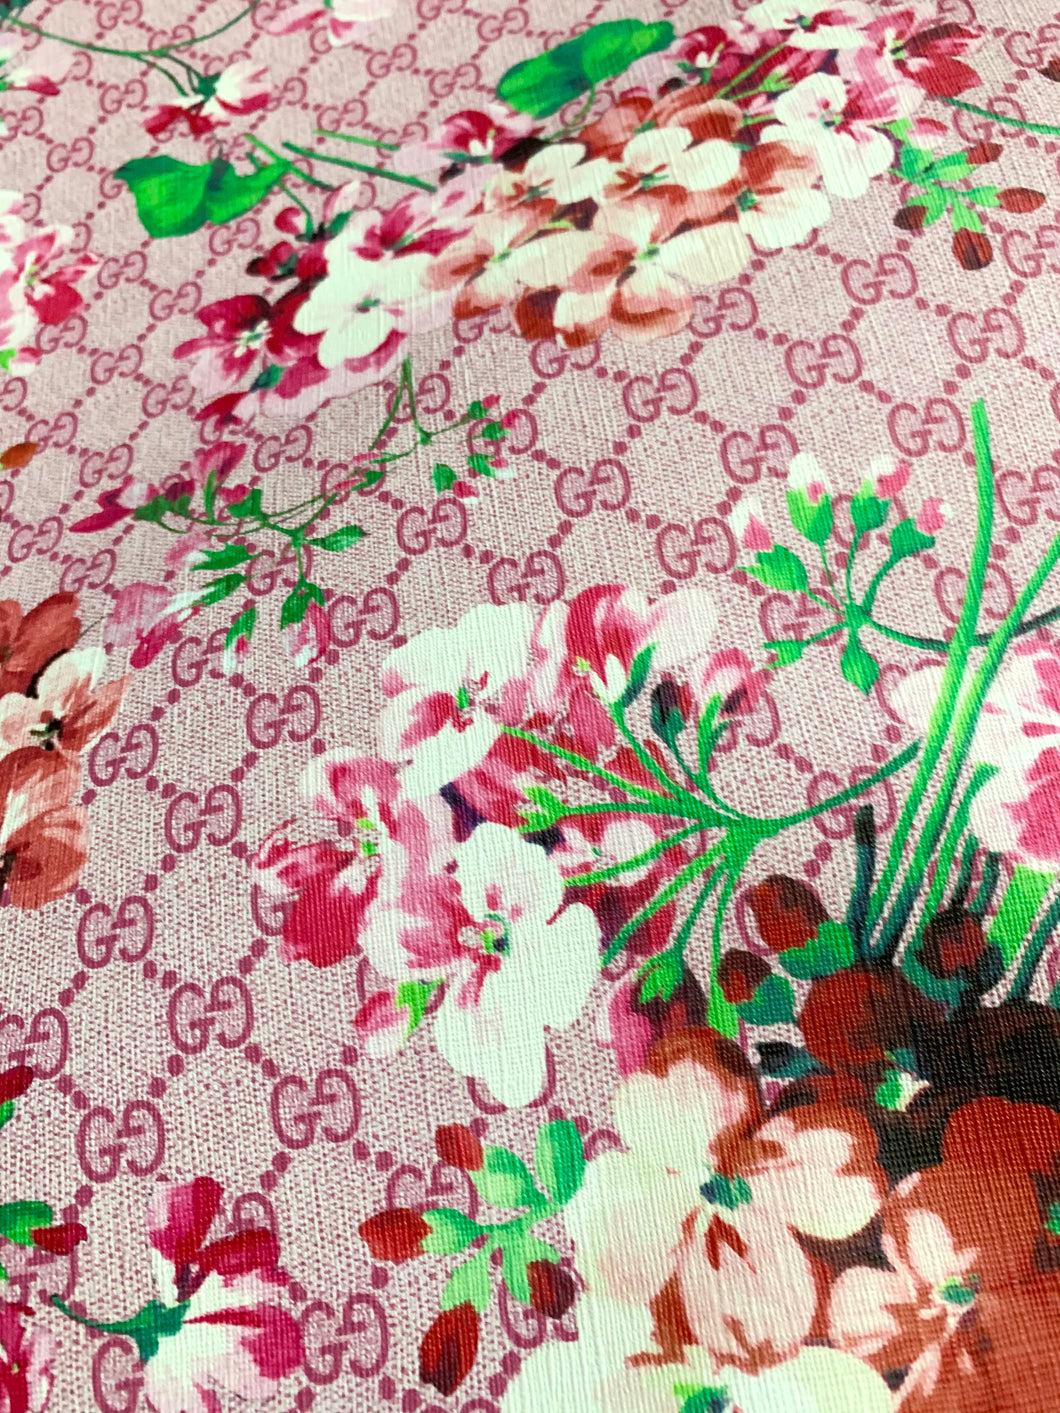 Pink Flower Blooming Gucci Inspired Fabric Material for Custom